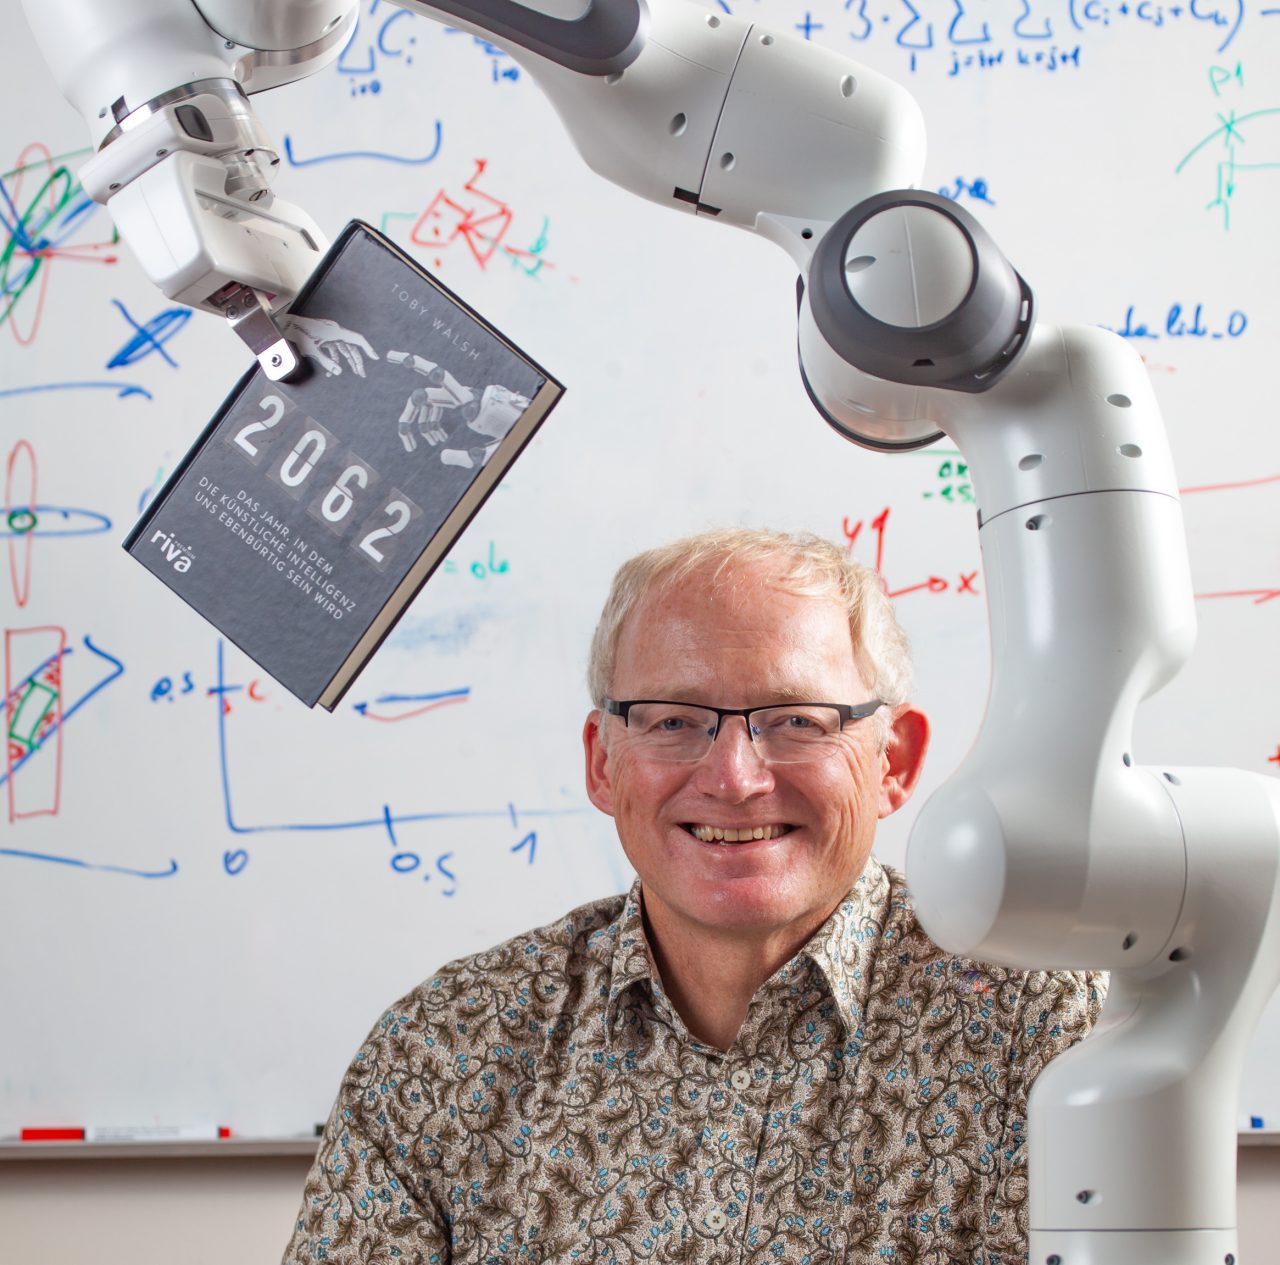 Prof. Toby Walsh with robot arm